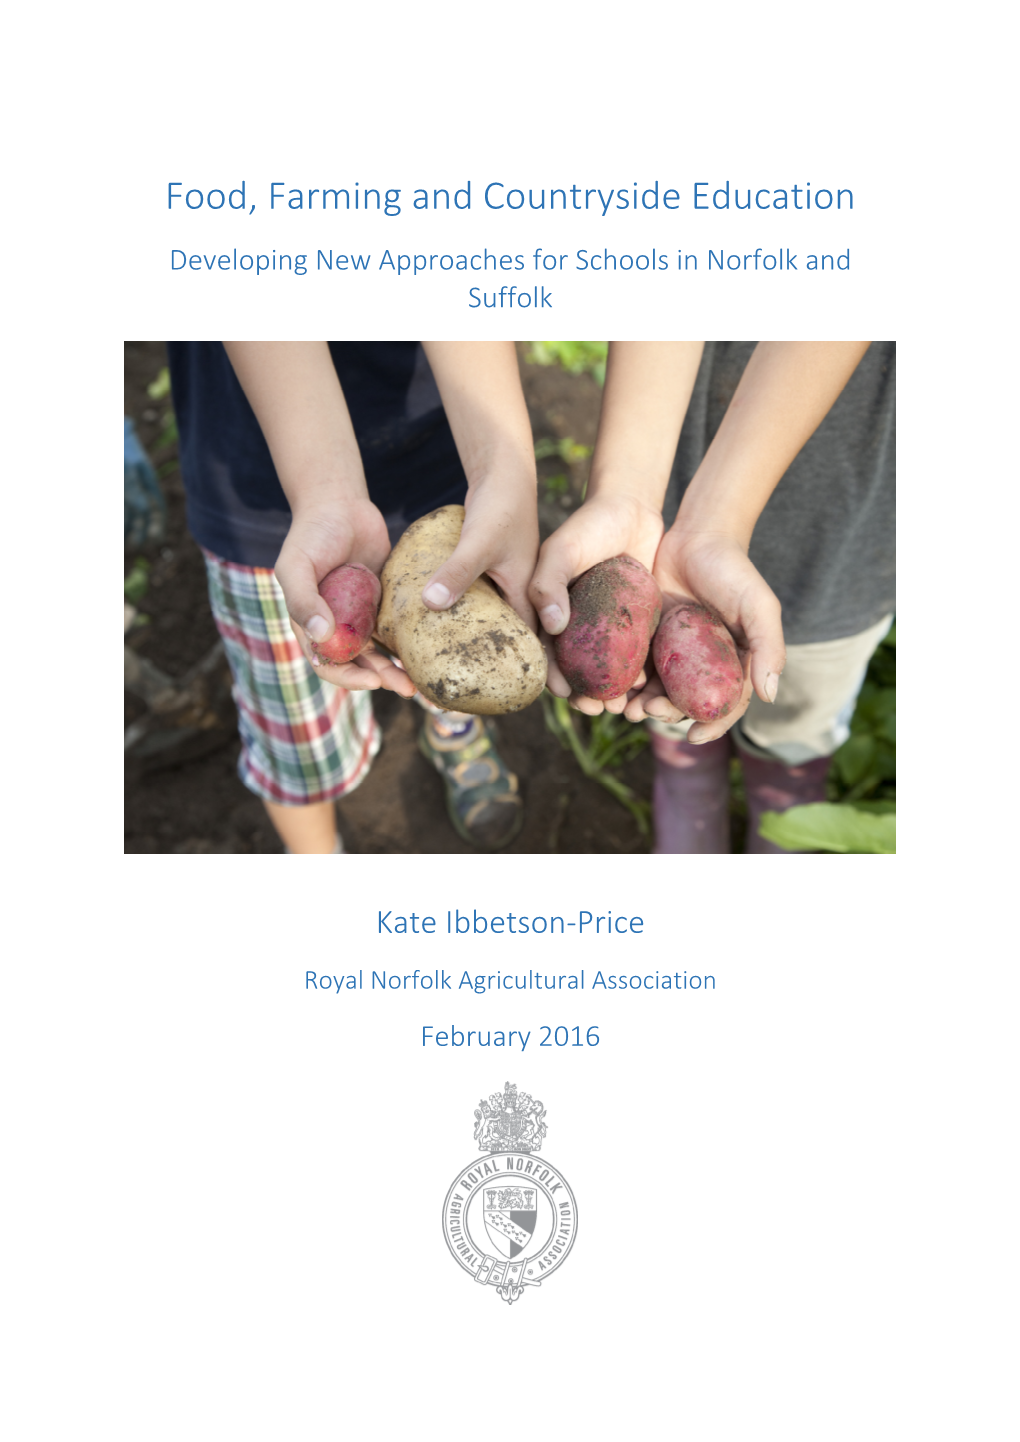 Food, Farming and Countryside Education Developing New Approaches for Schools in Norfolk and Suffolk